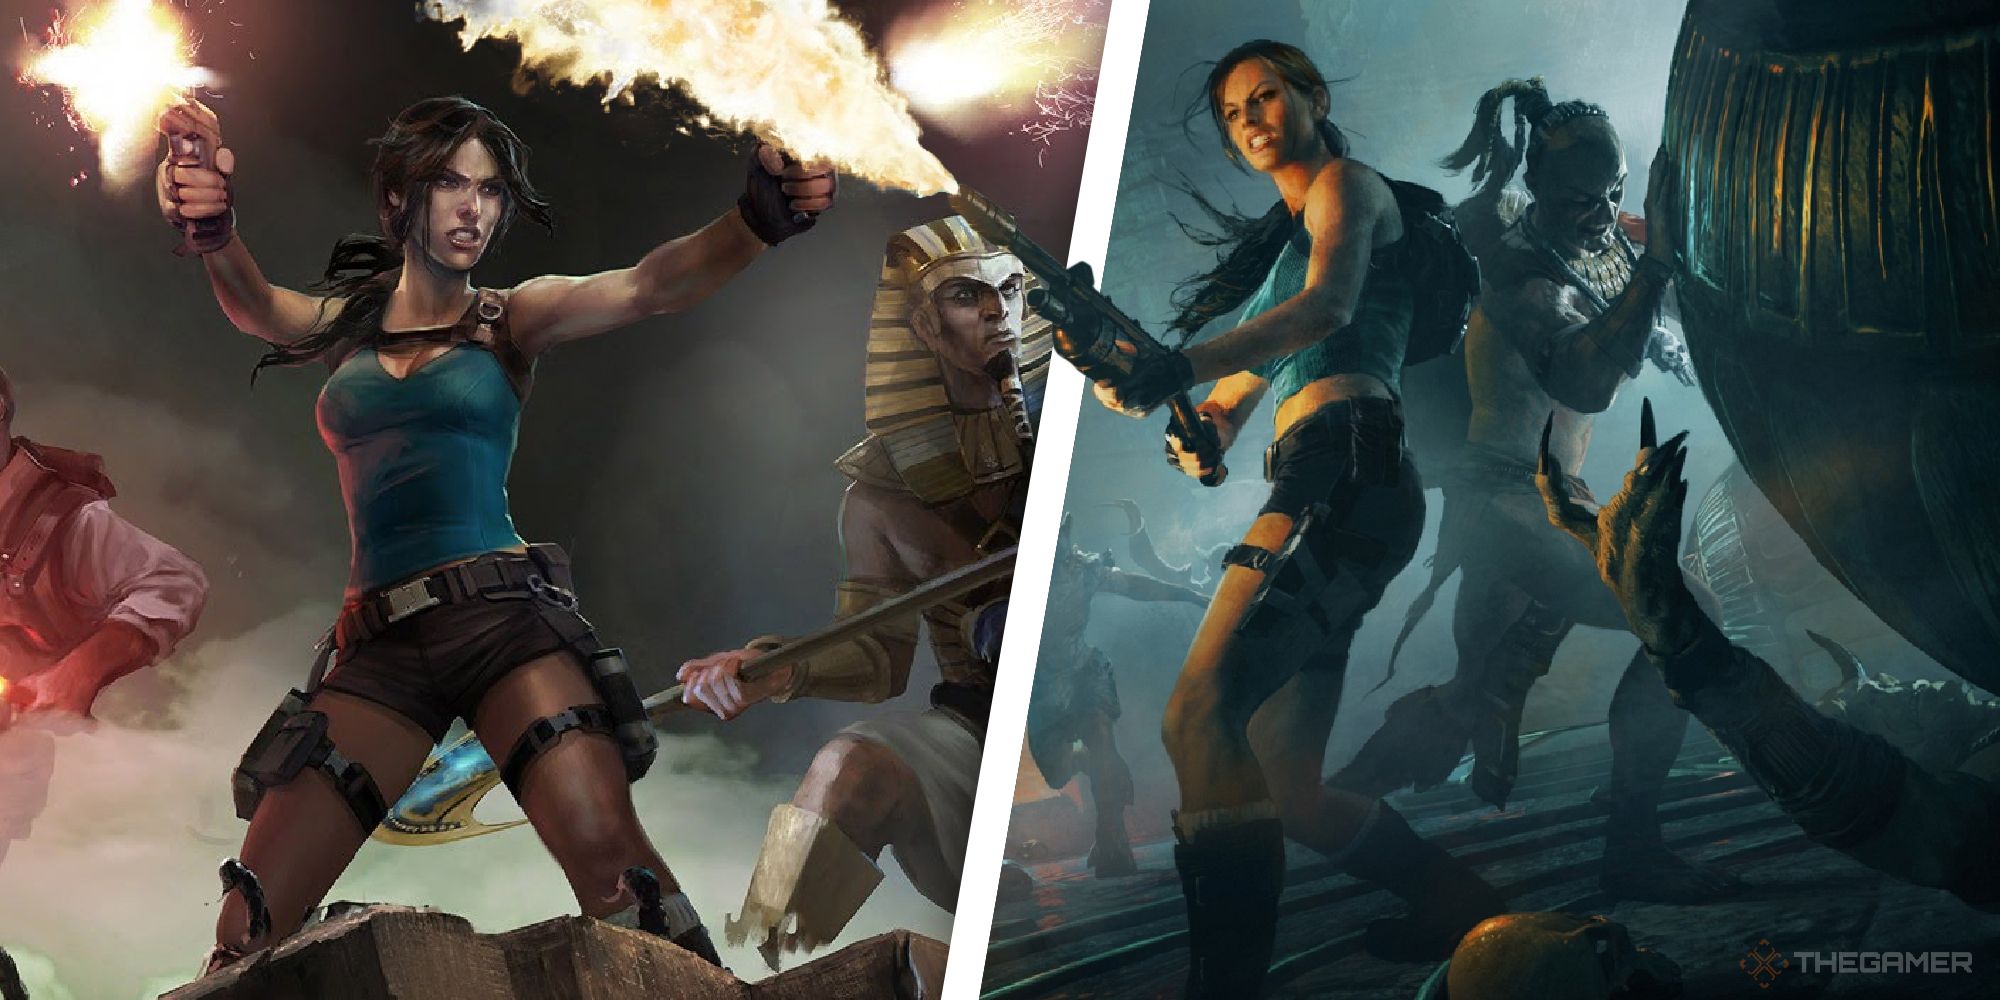 Tomb Raider spinoffs guardian of light and temple of osiris split image showing lara shooting pistols and a flamethrower